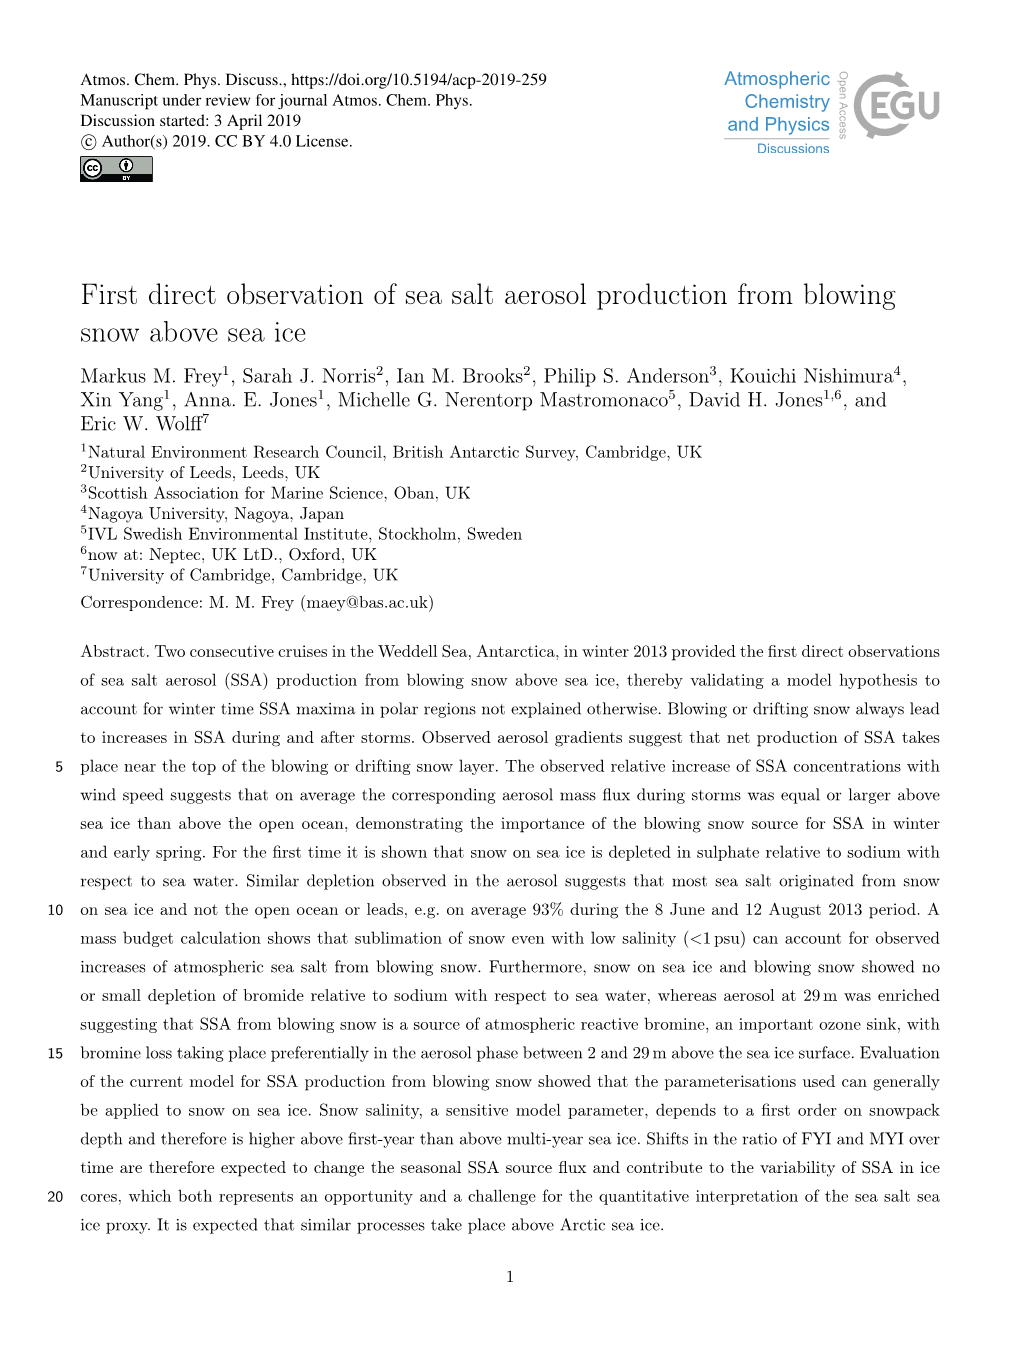 First Direct Observation of Sea Salt Aerosol Production from Blowing Snow Above Sea Ice Markus M